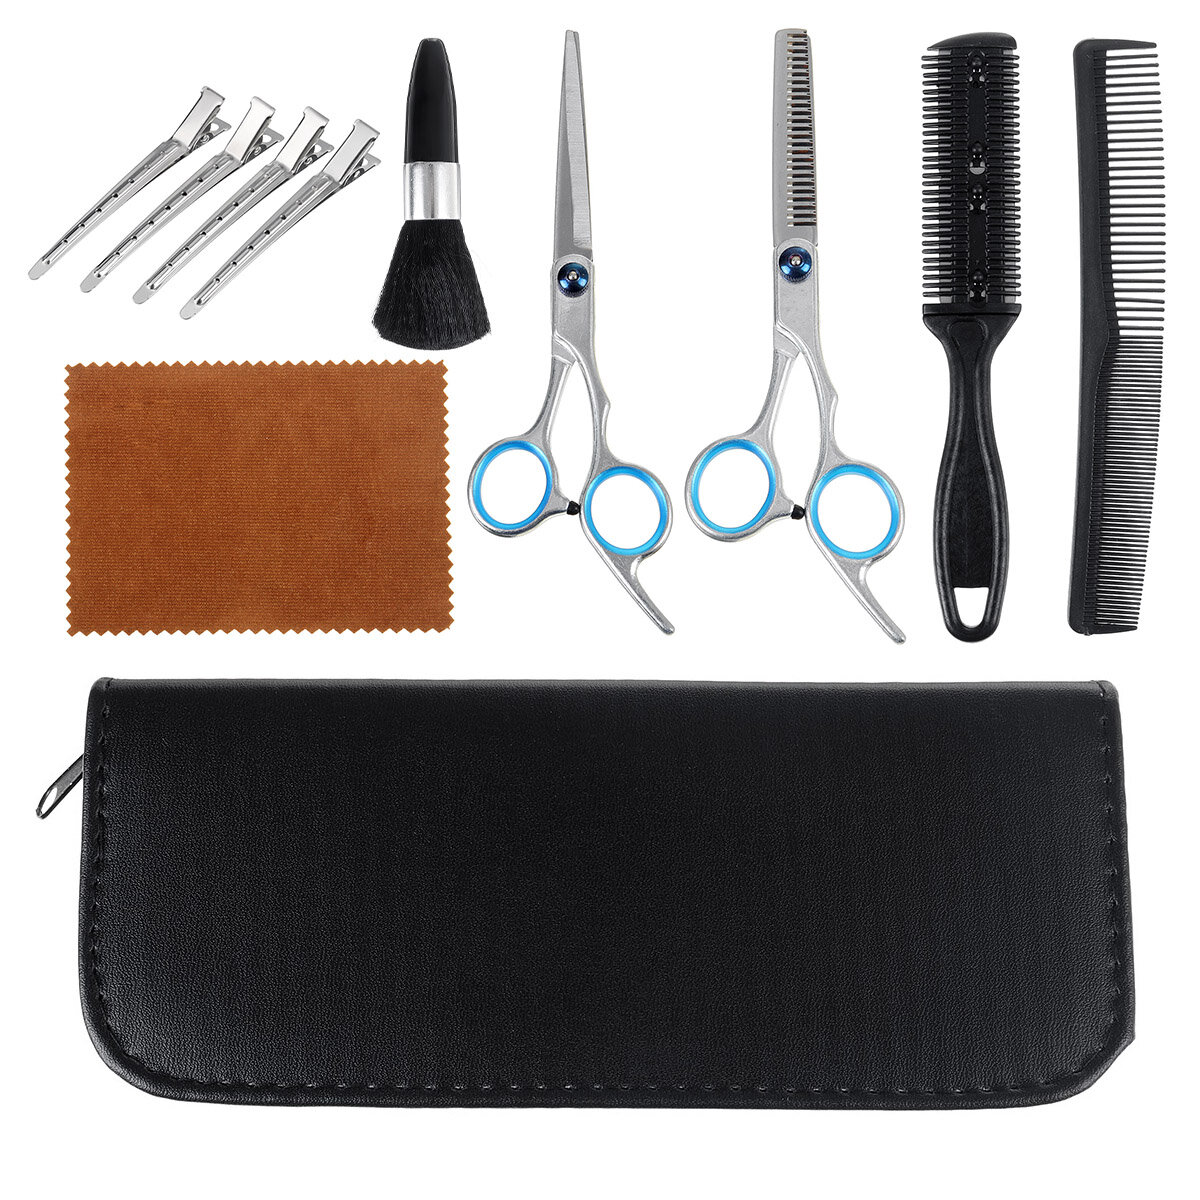 

12pcs Professional Hair Cutting Thinning Steel Scissors Barber Shears Hairdressing Set